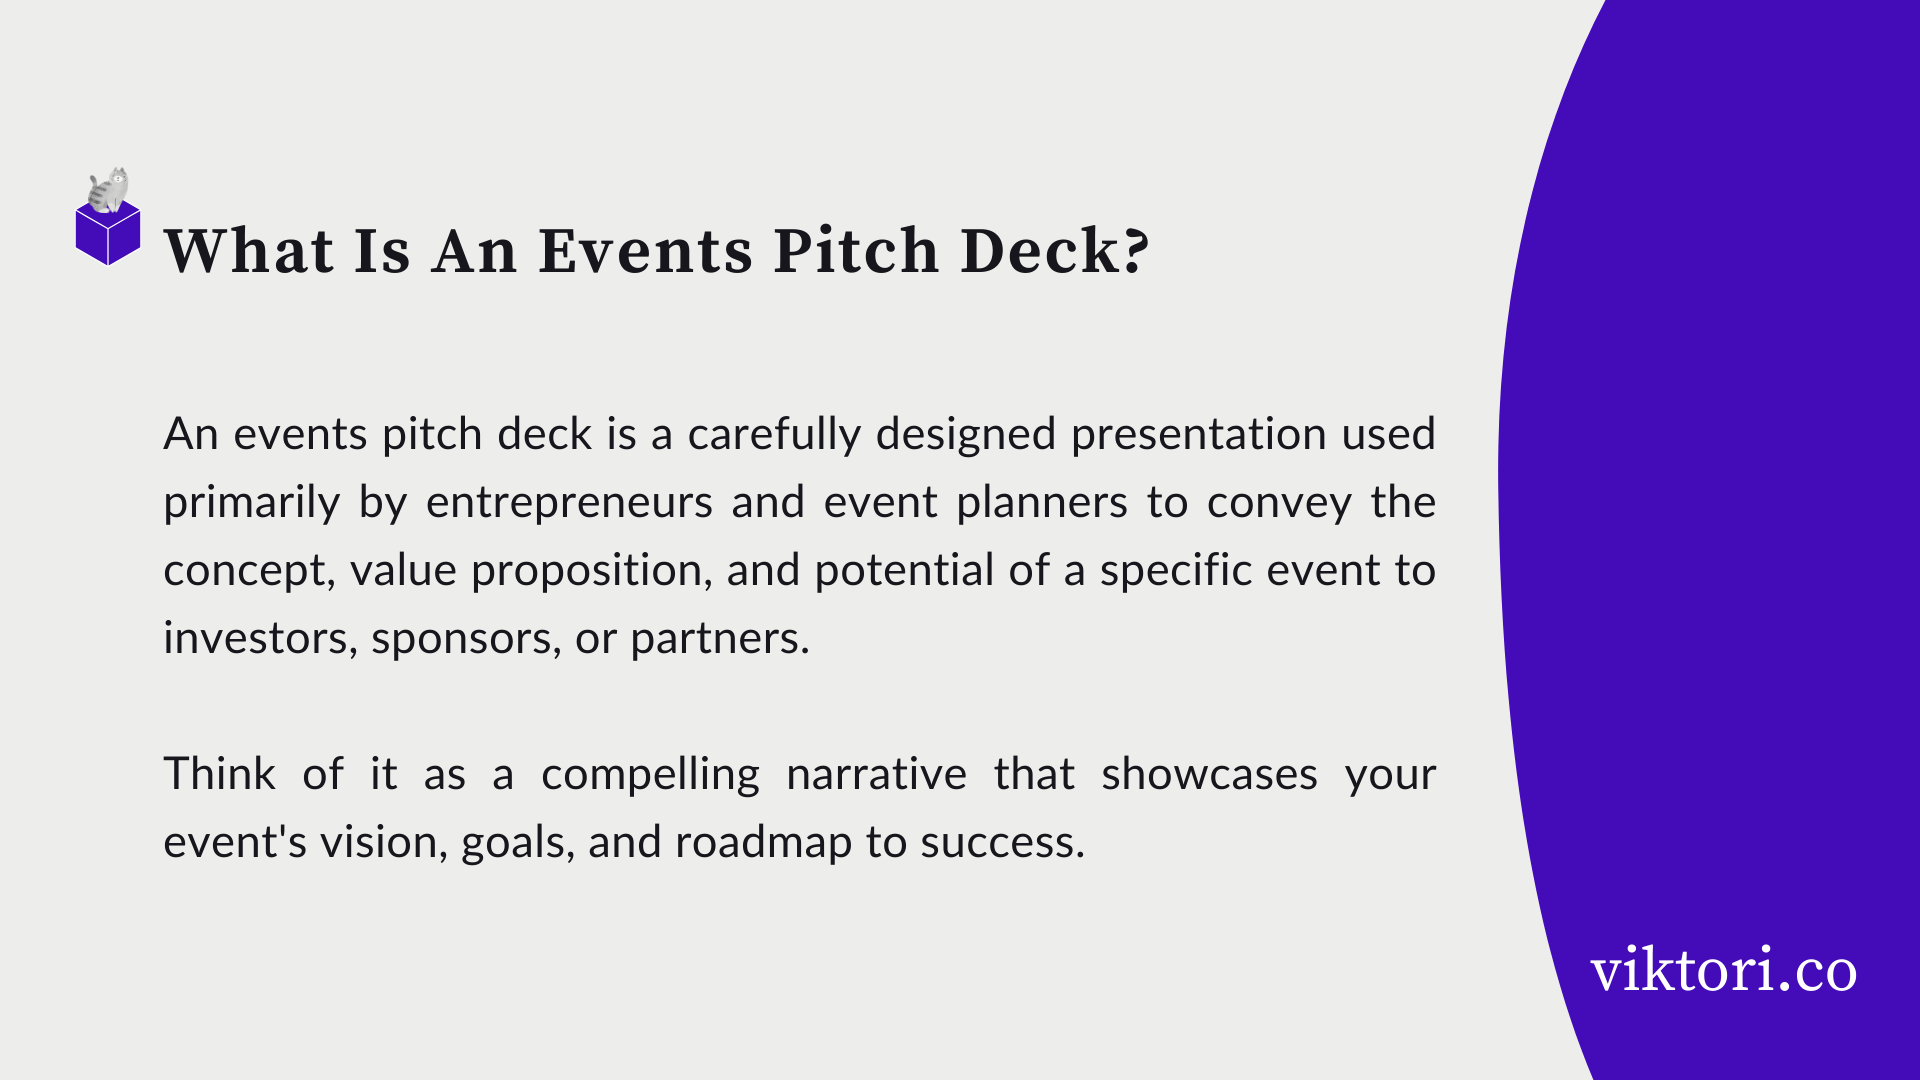 What is an event pitch deck?